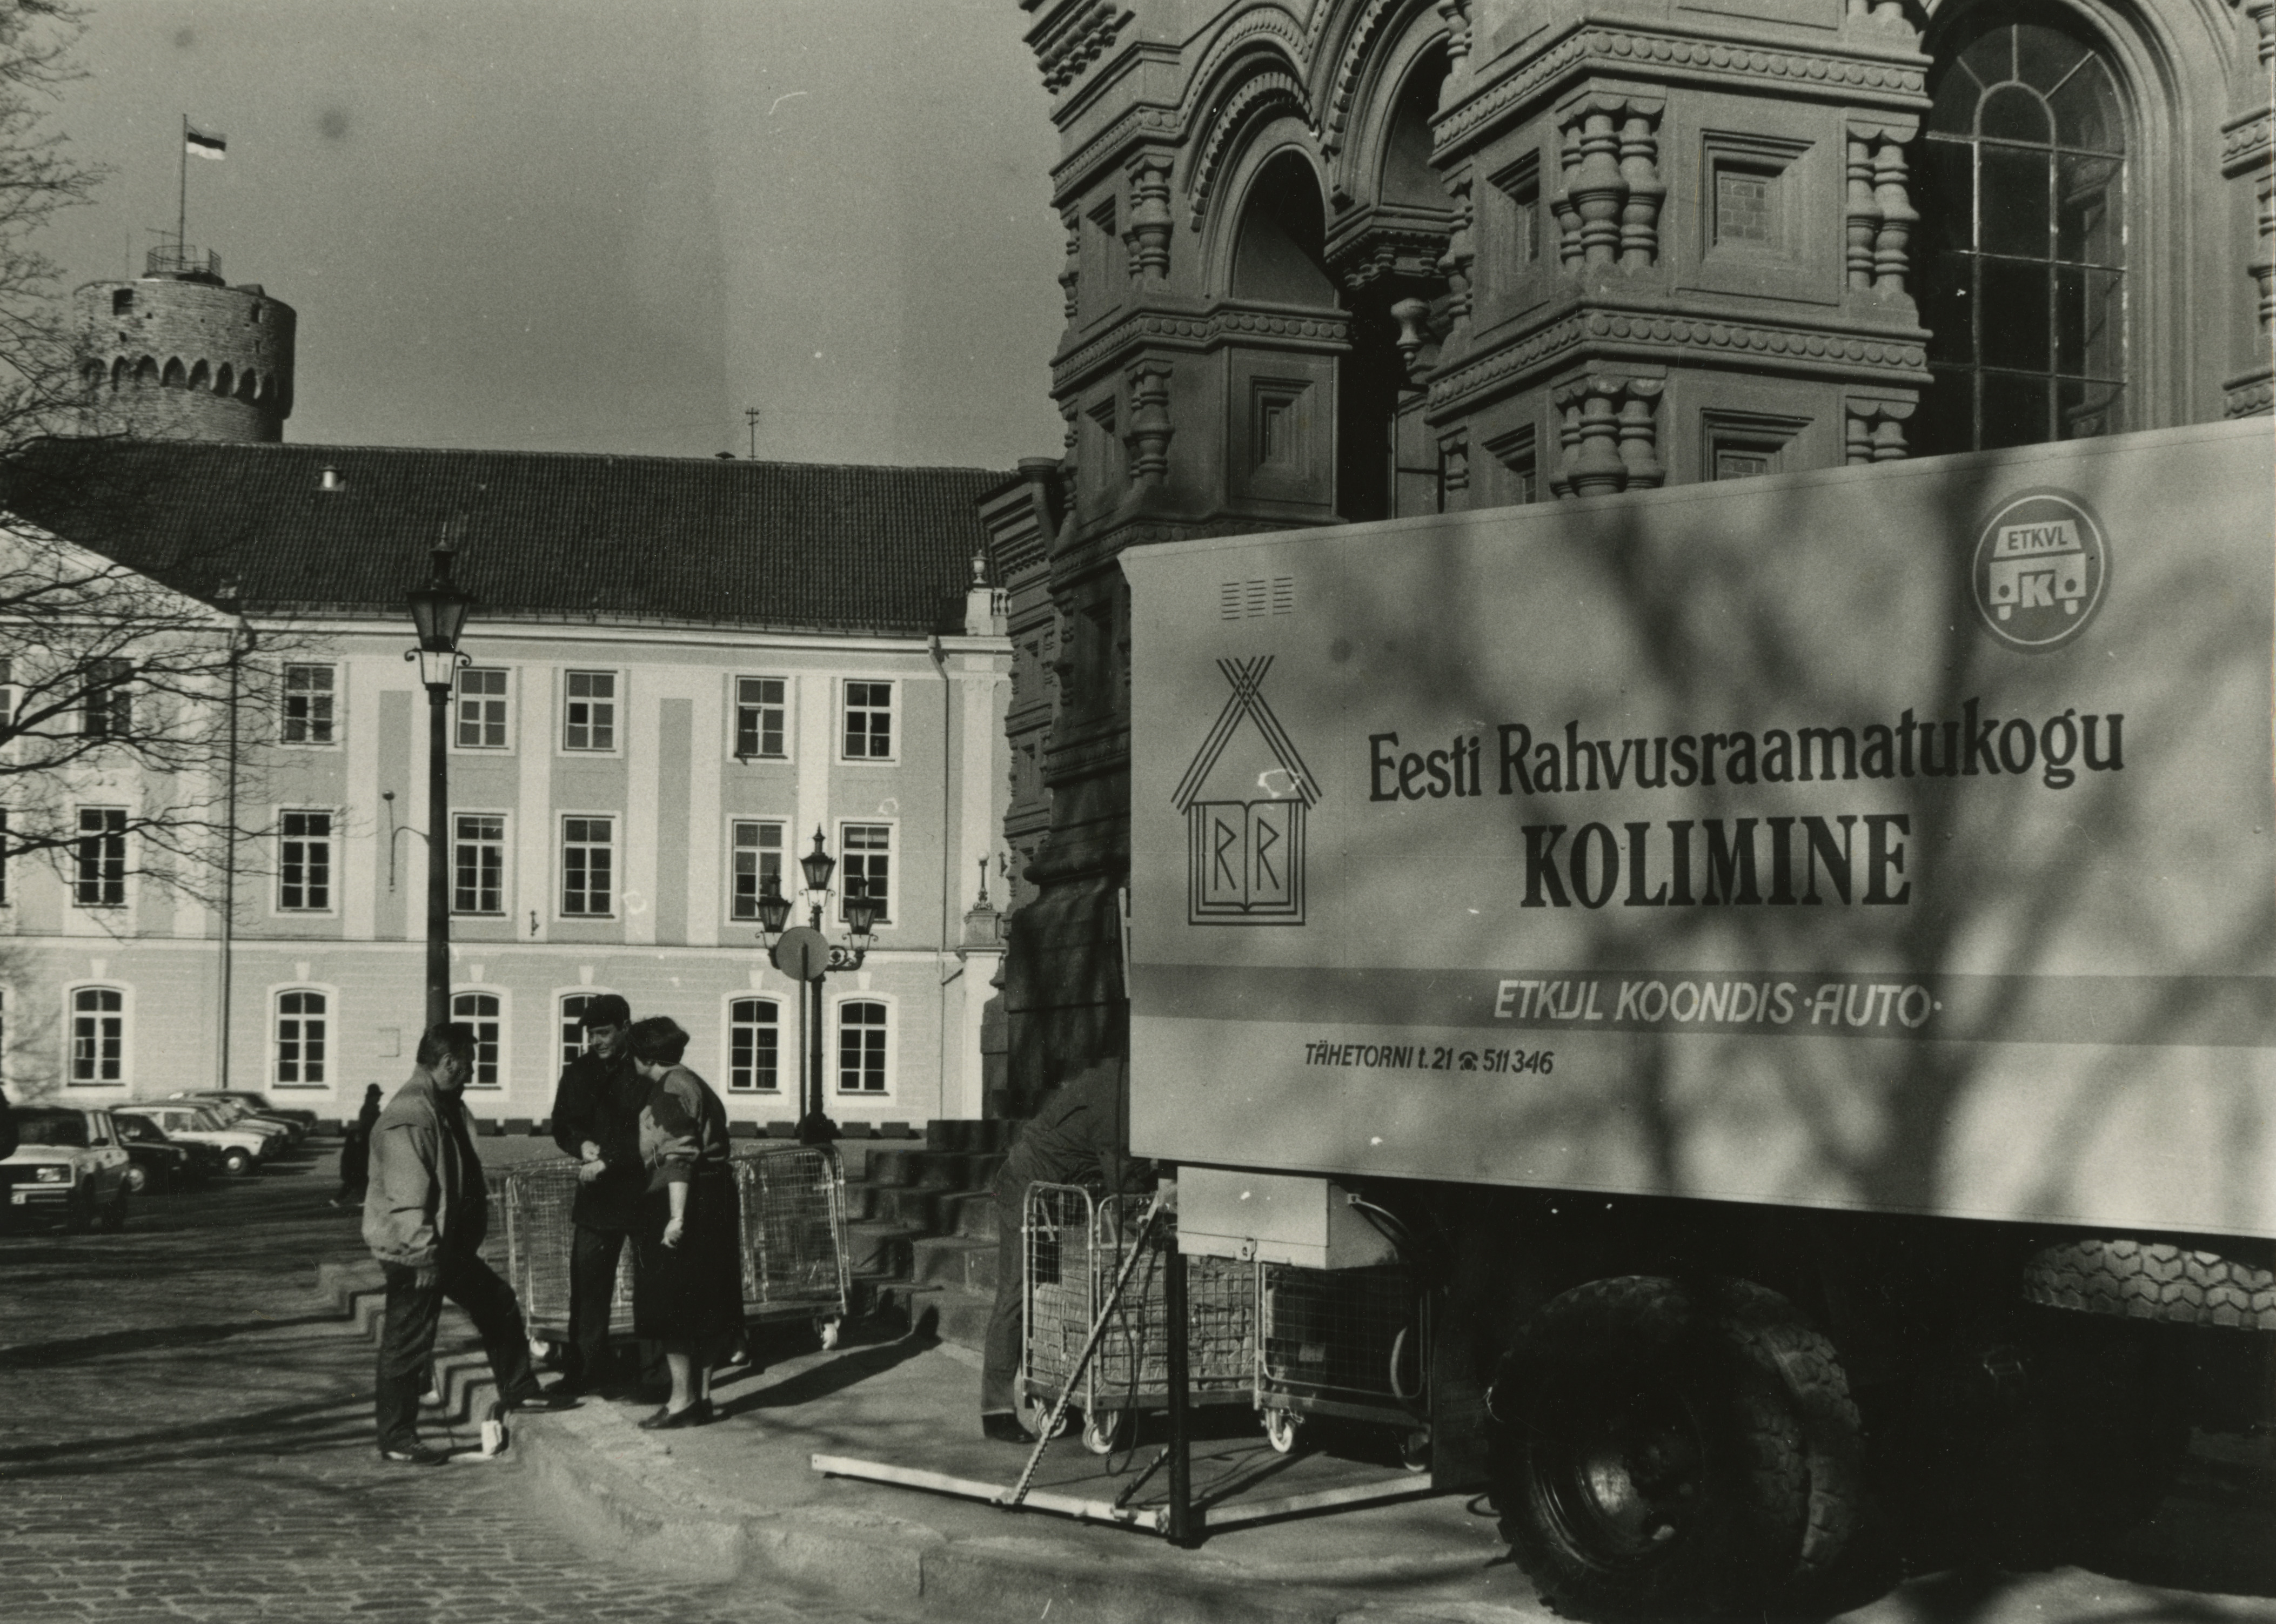 The first day of the National Library from Toompea to Tõnismäe on 23 April 1991